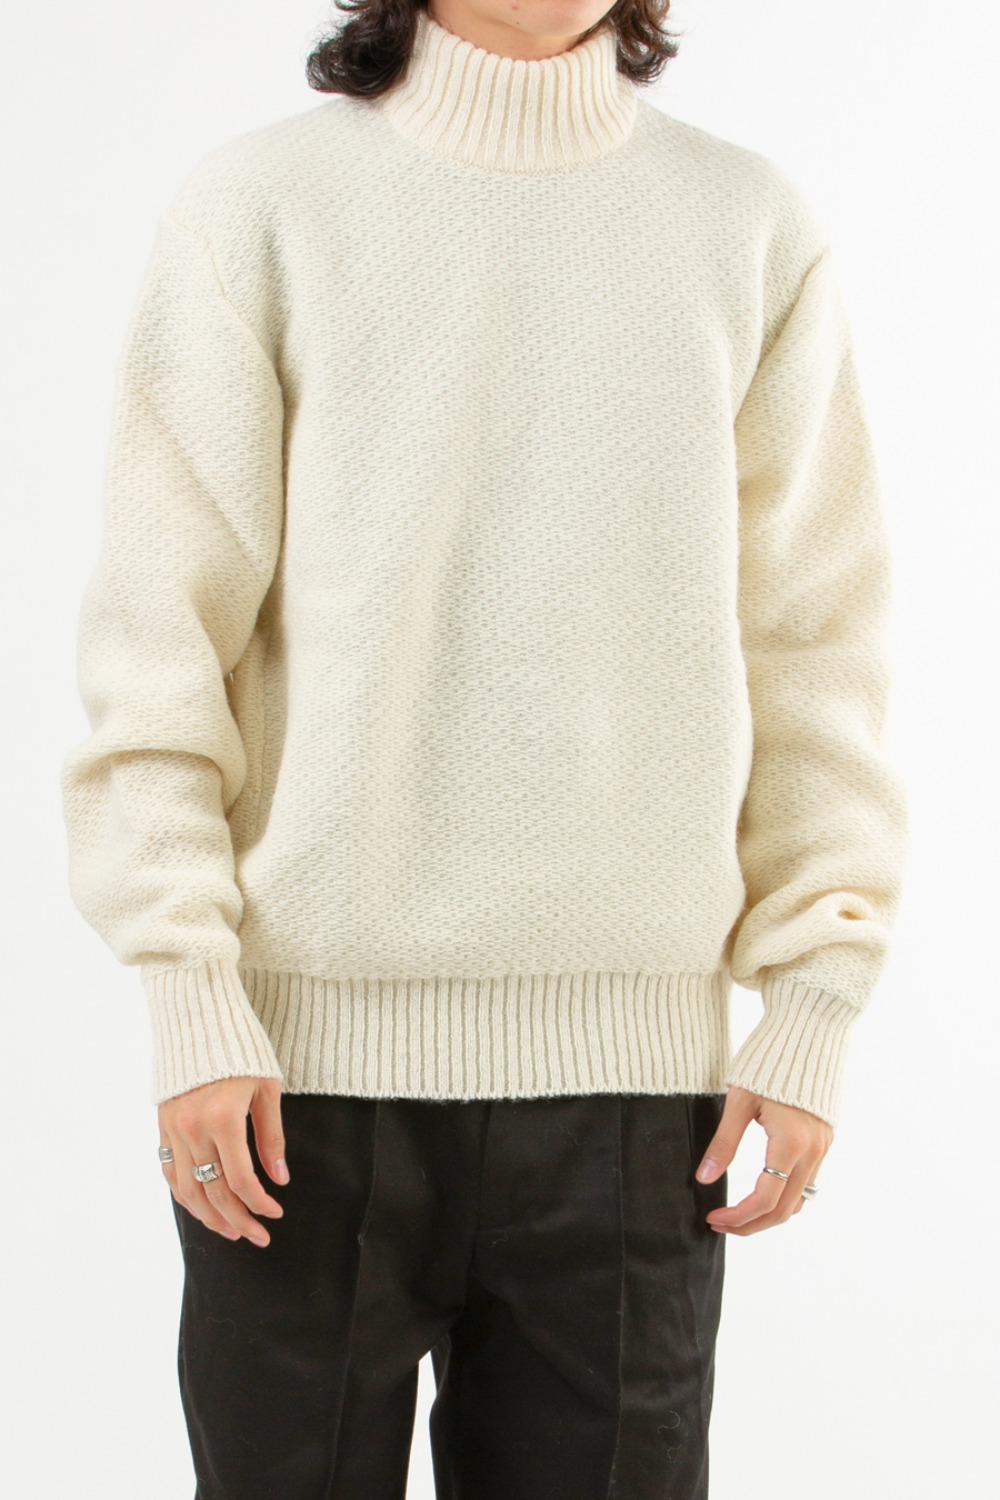 KNIT PULLOVER	- WHITE